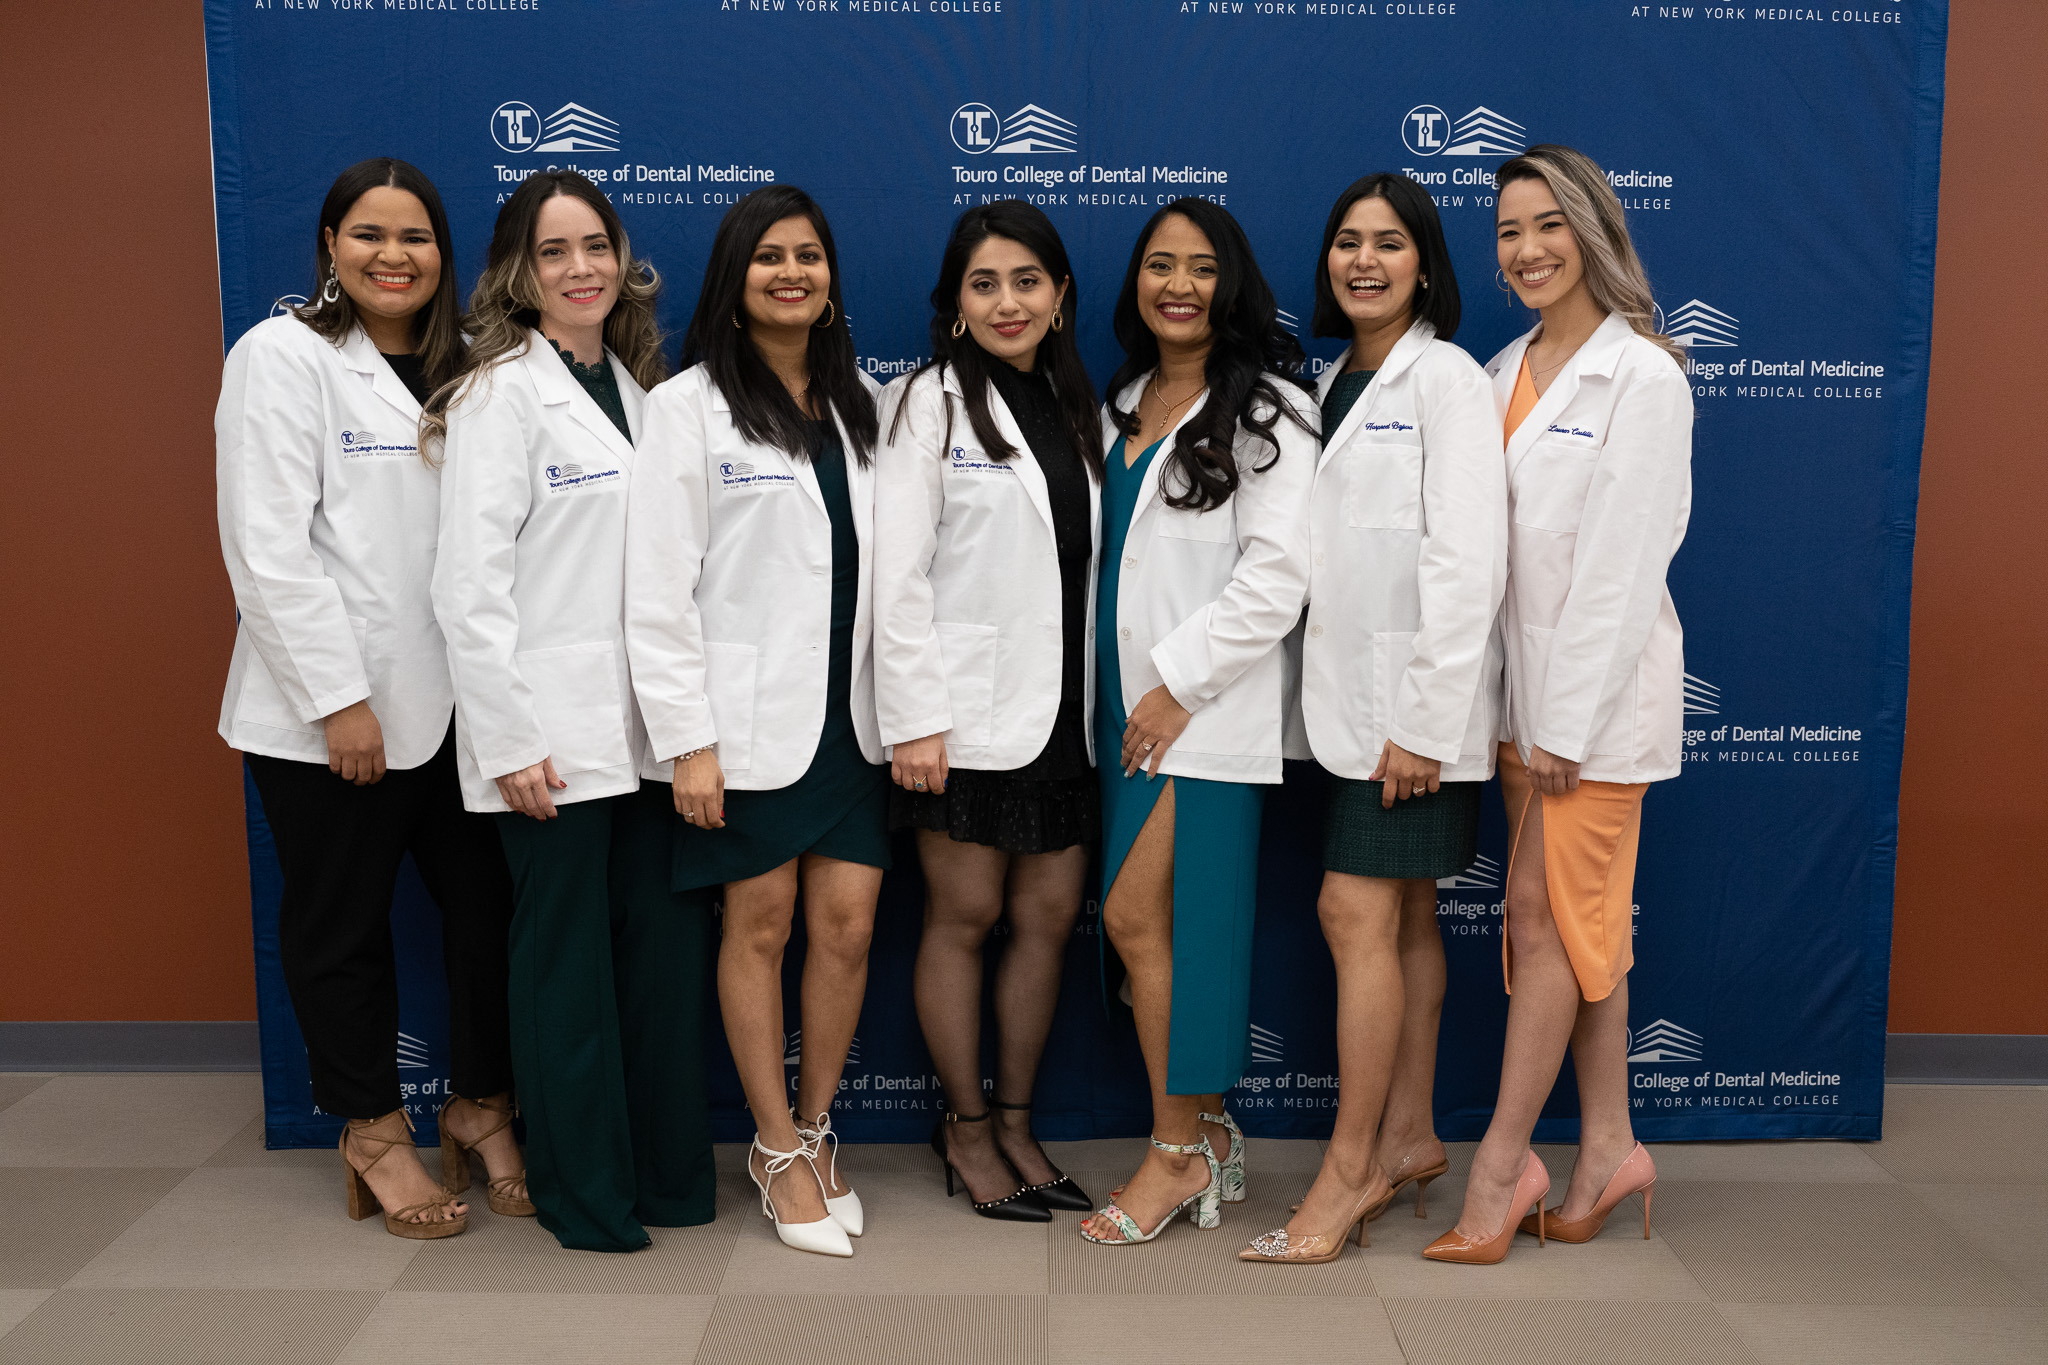 Seven students smiling together at event while wearing TCDM white coats.